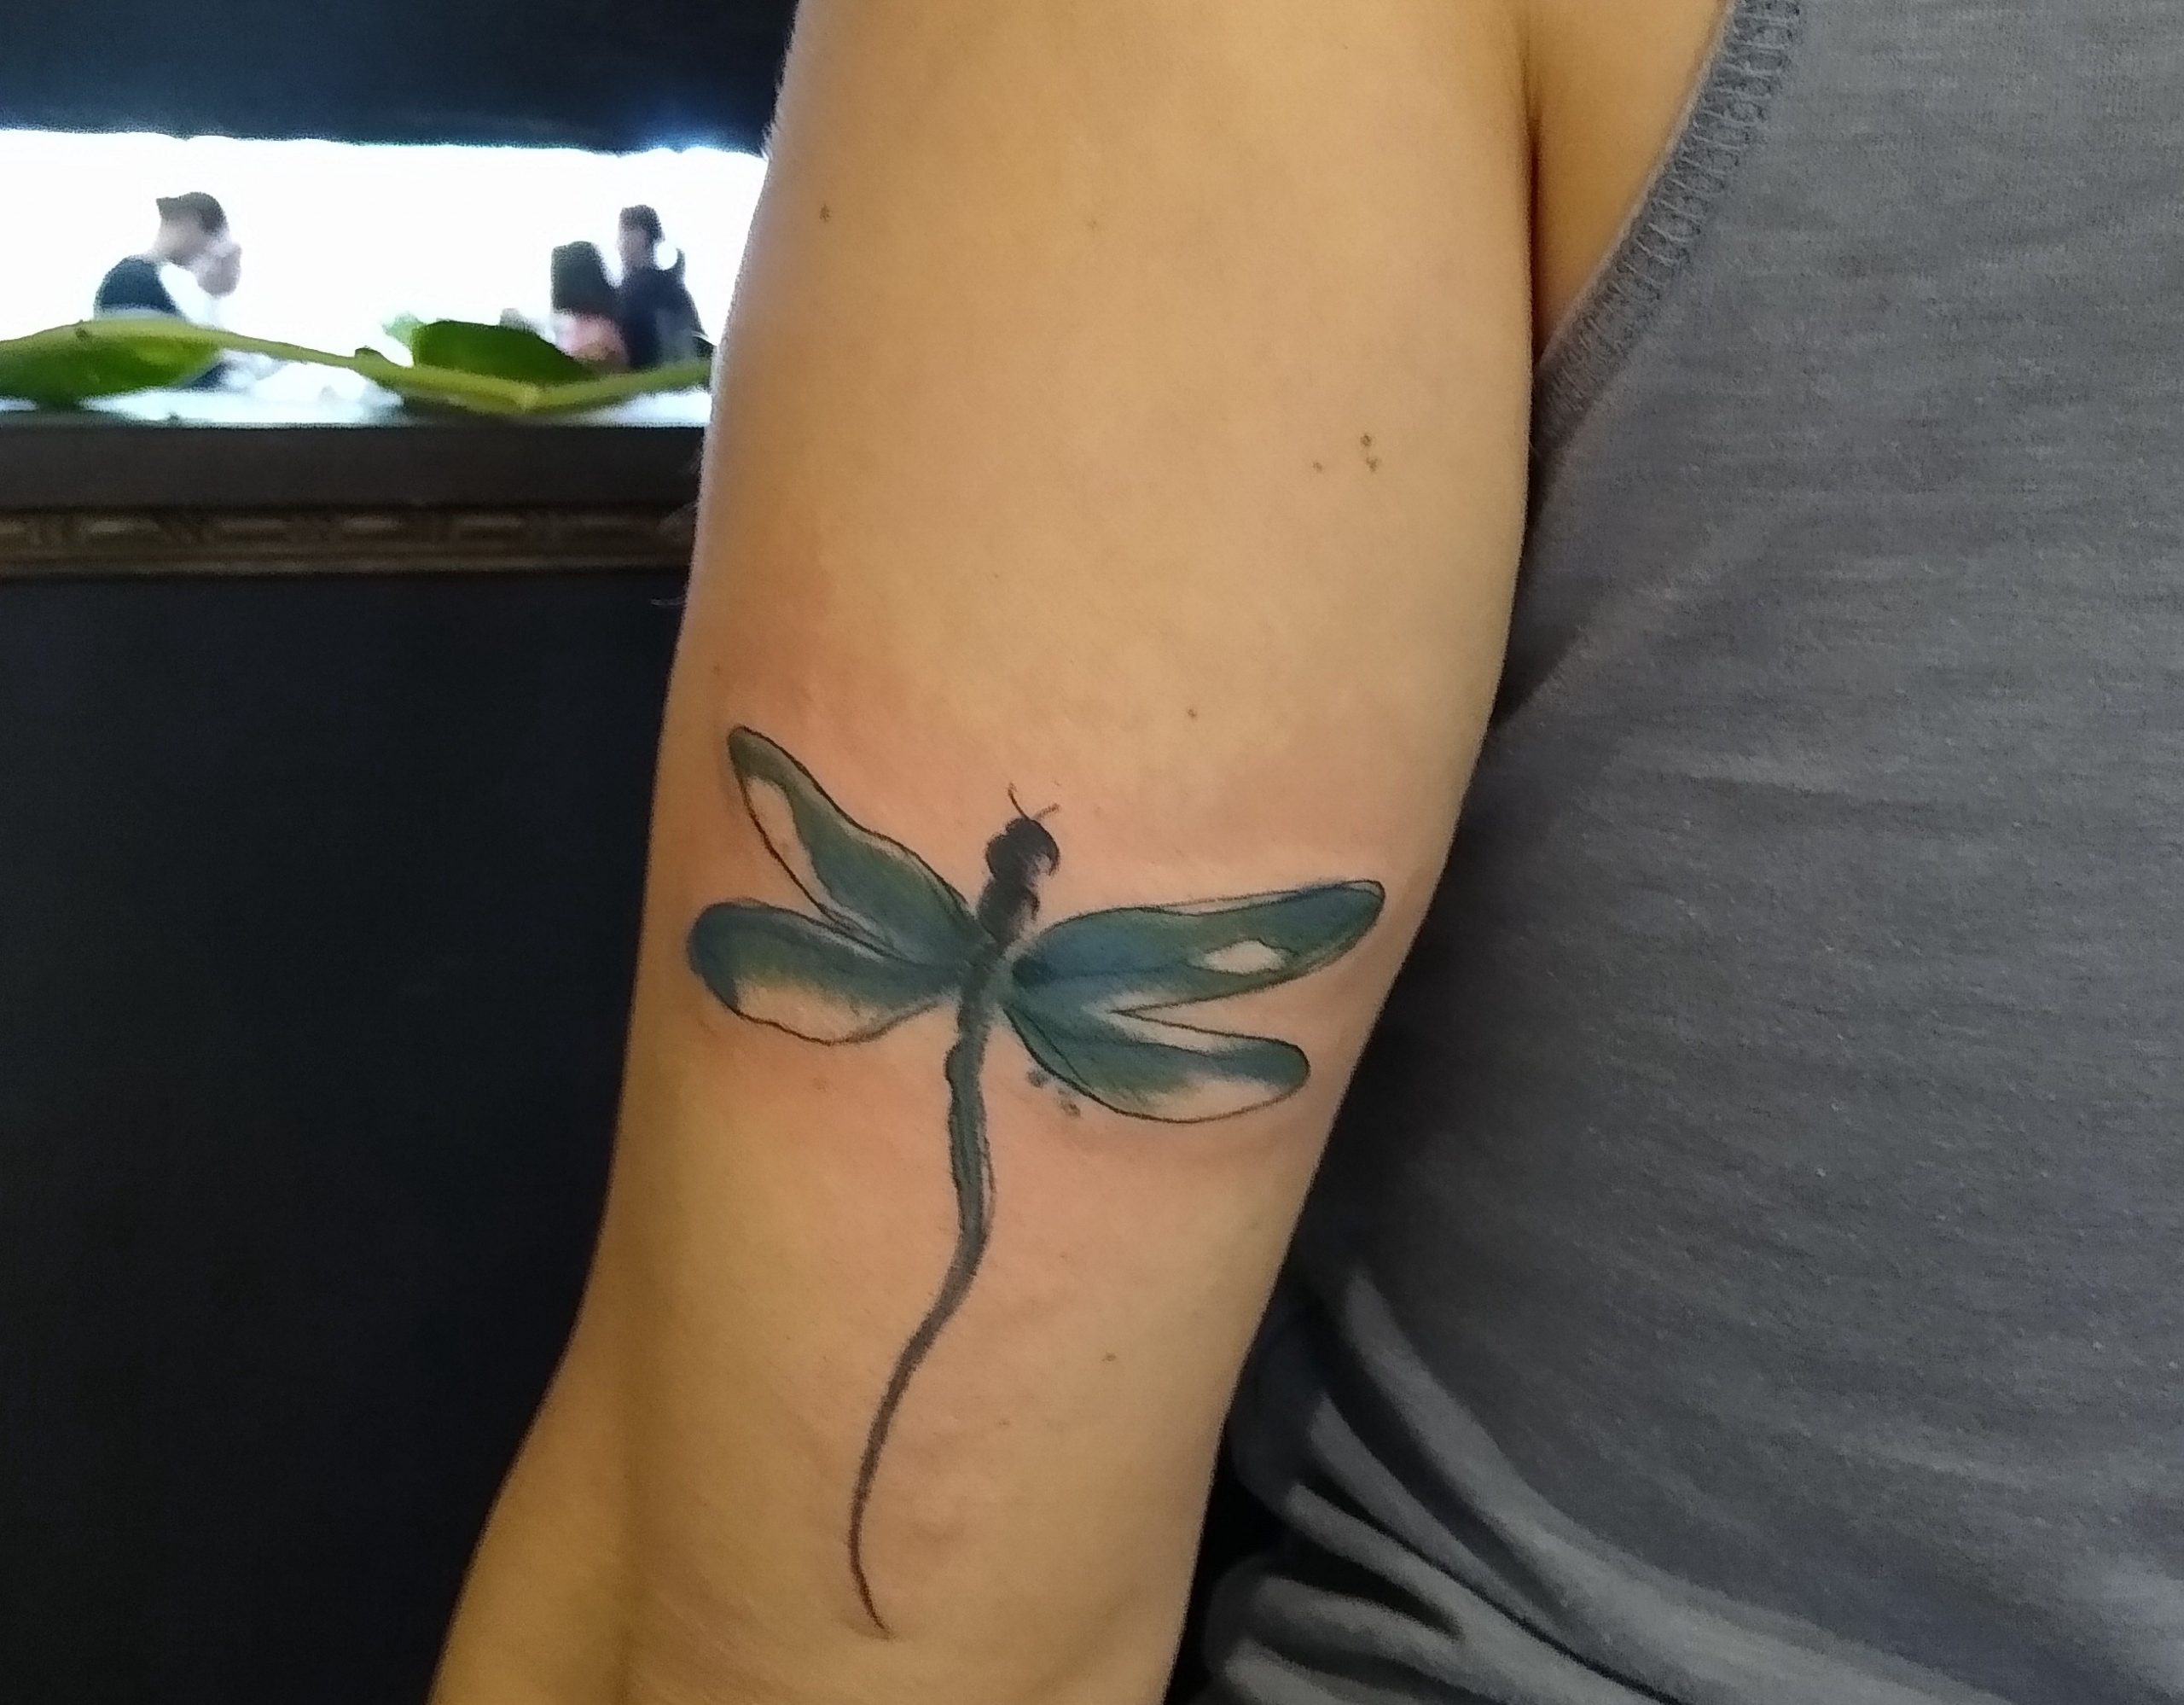 Dragonfly Tattoo Meaning  What Does Dragonfly Ink Symbolize